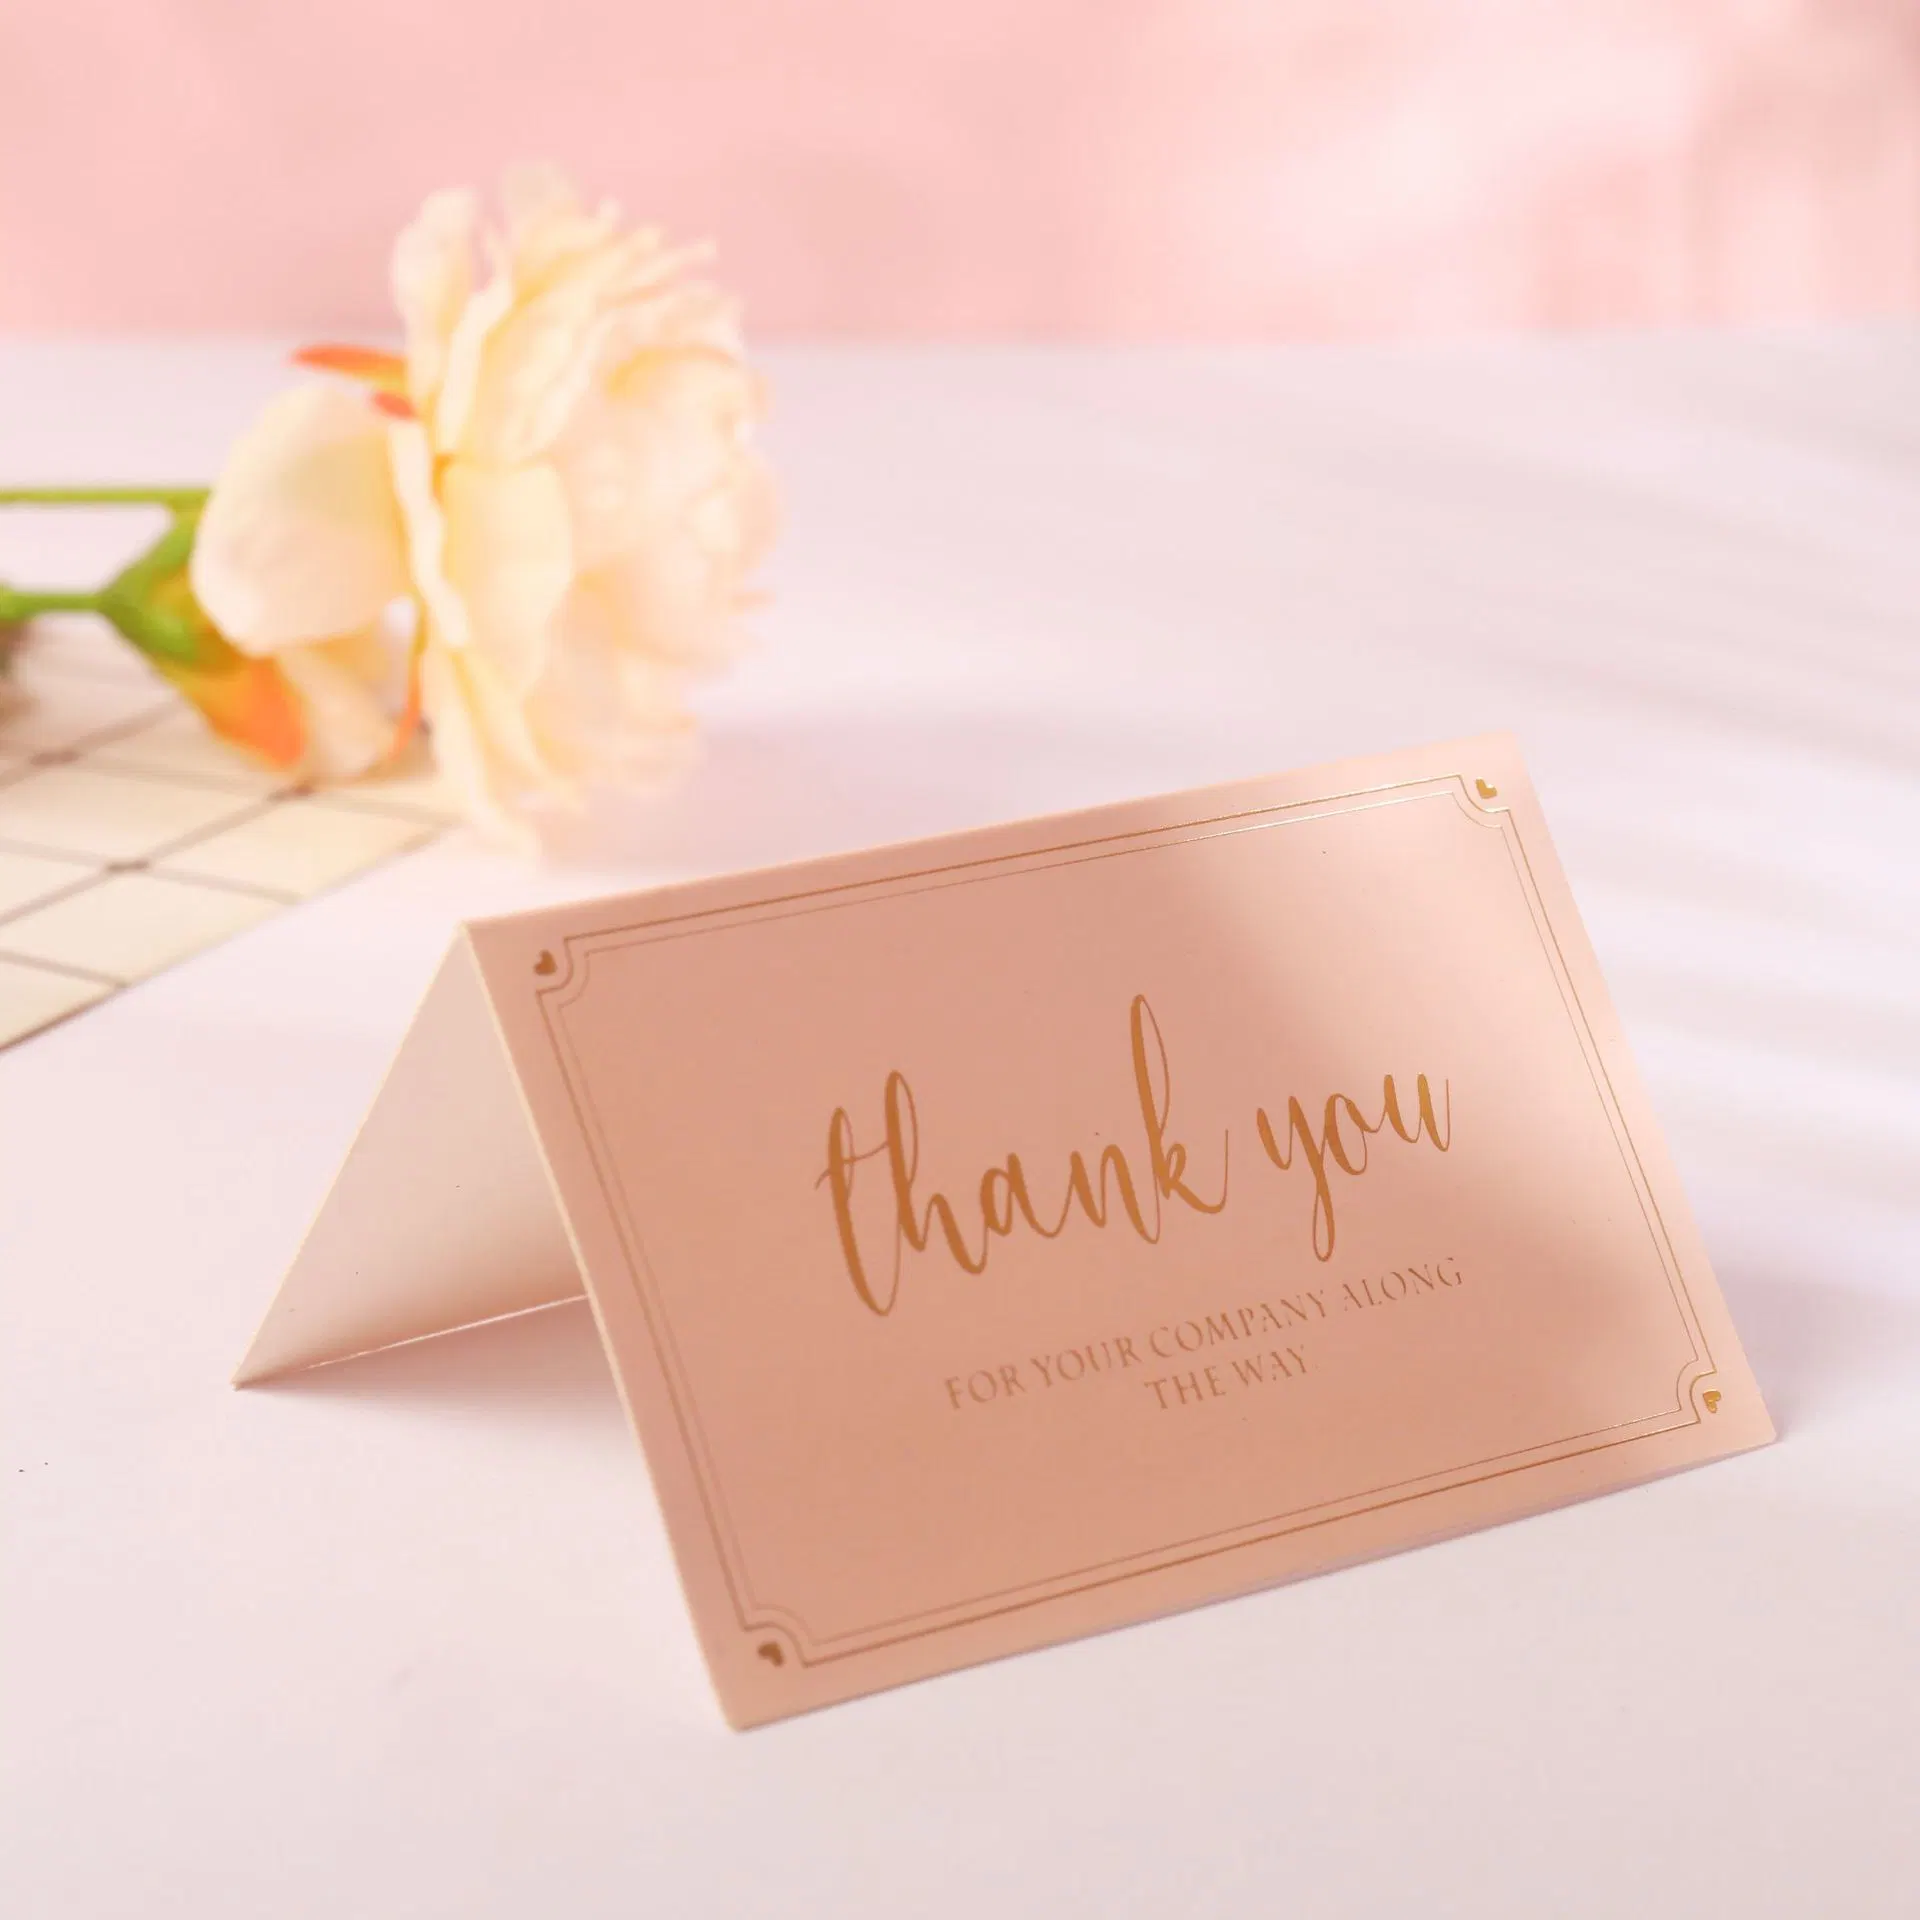 Thank You Card Blessings Cards Greeting Cards with Gold Stamping Printed for Valentine's Day/Christmas Greeting Cards